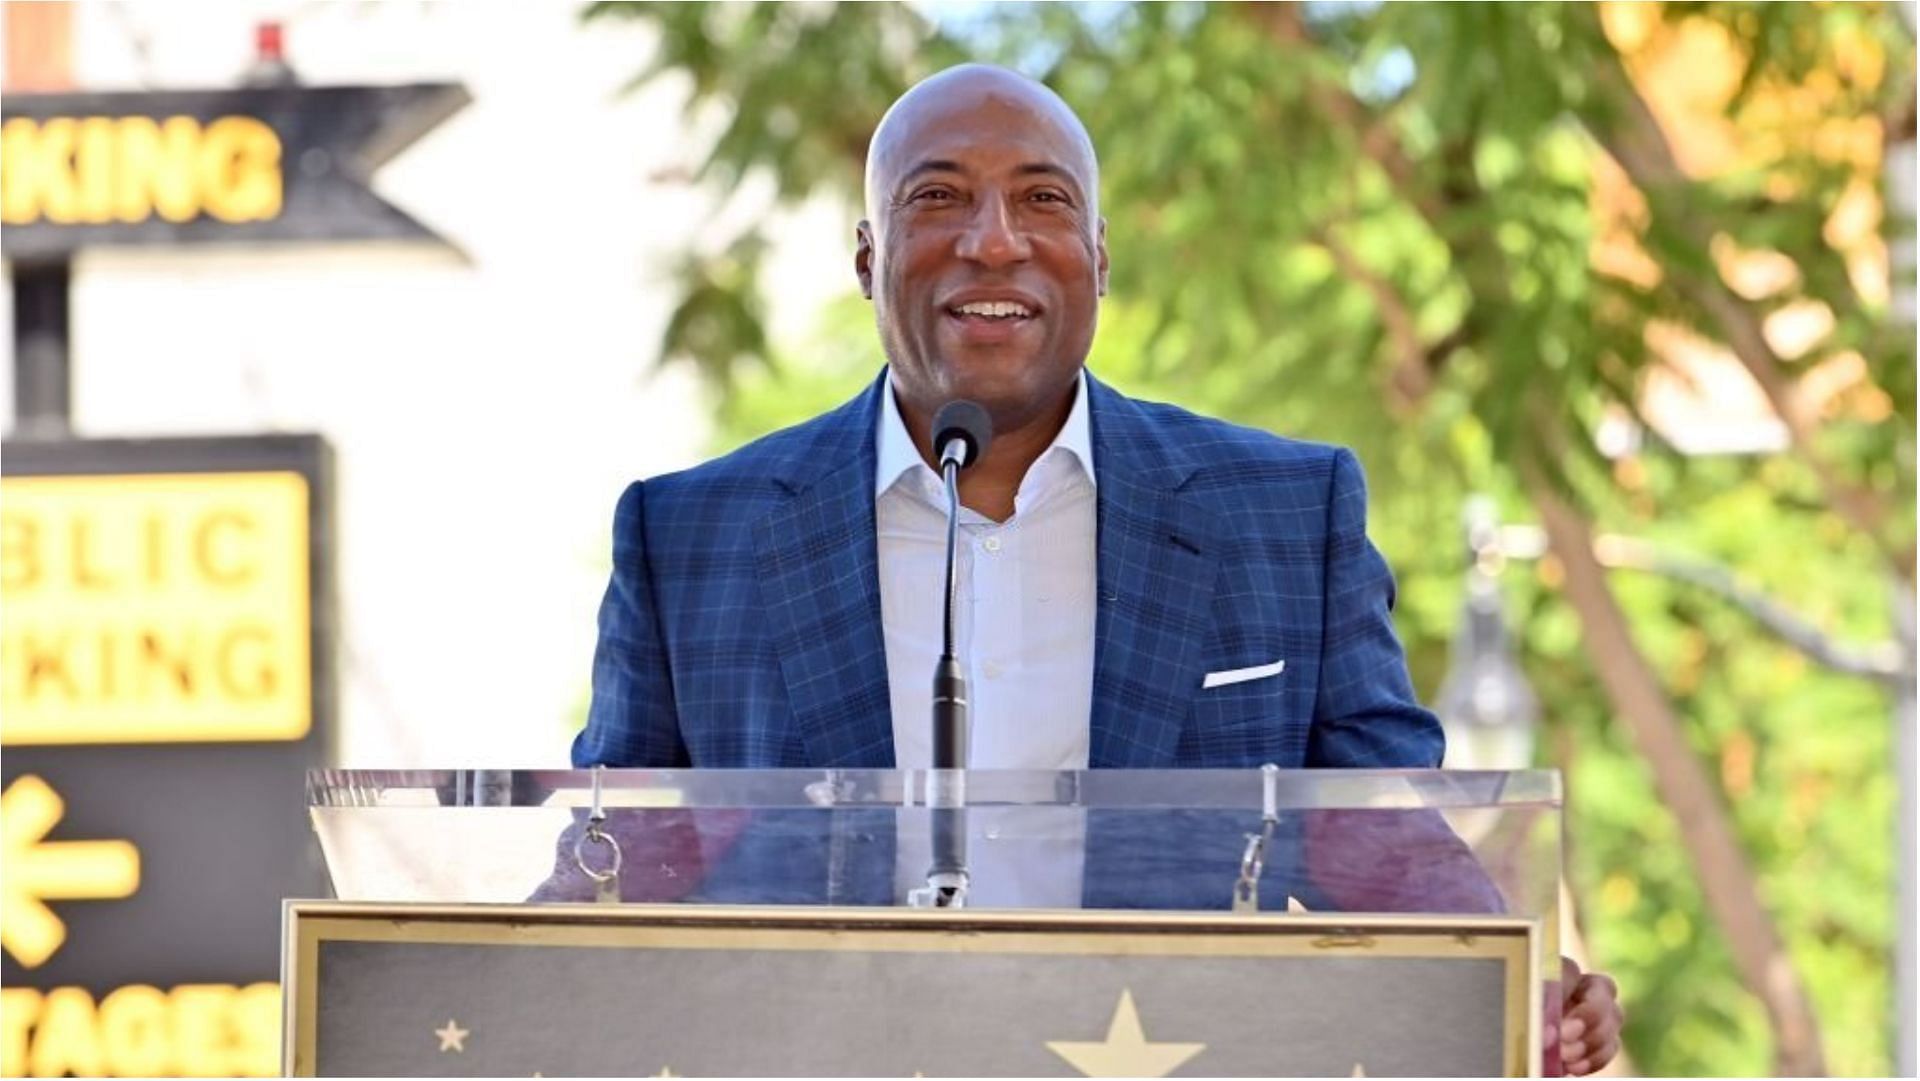 Byron Allen has purchased a mansion worth $100 million (Image via Stefanie Keenan/Getty Images)